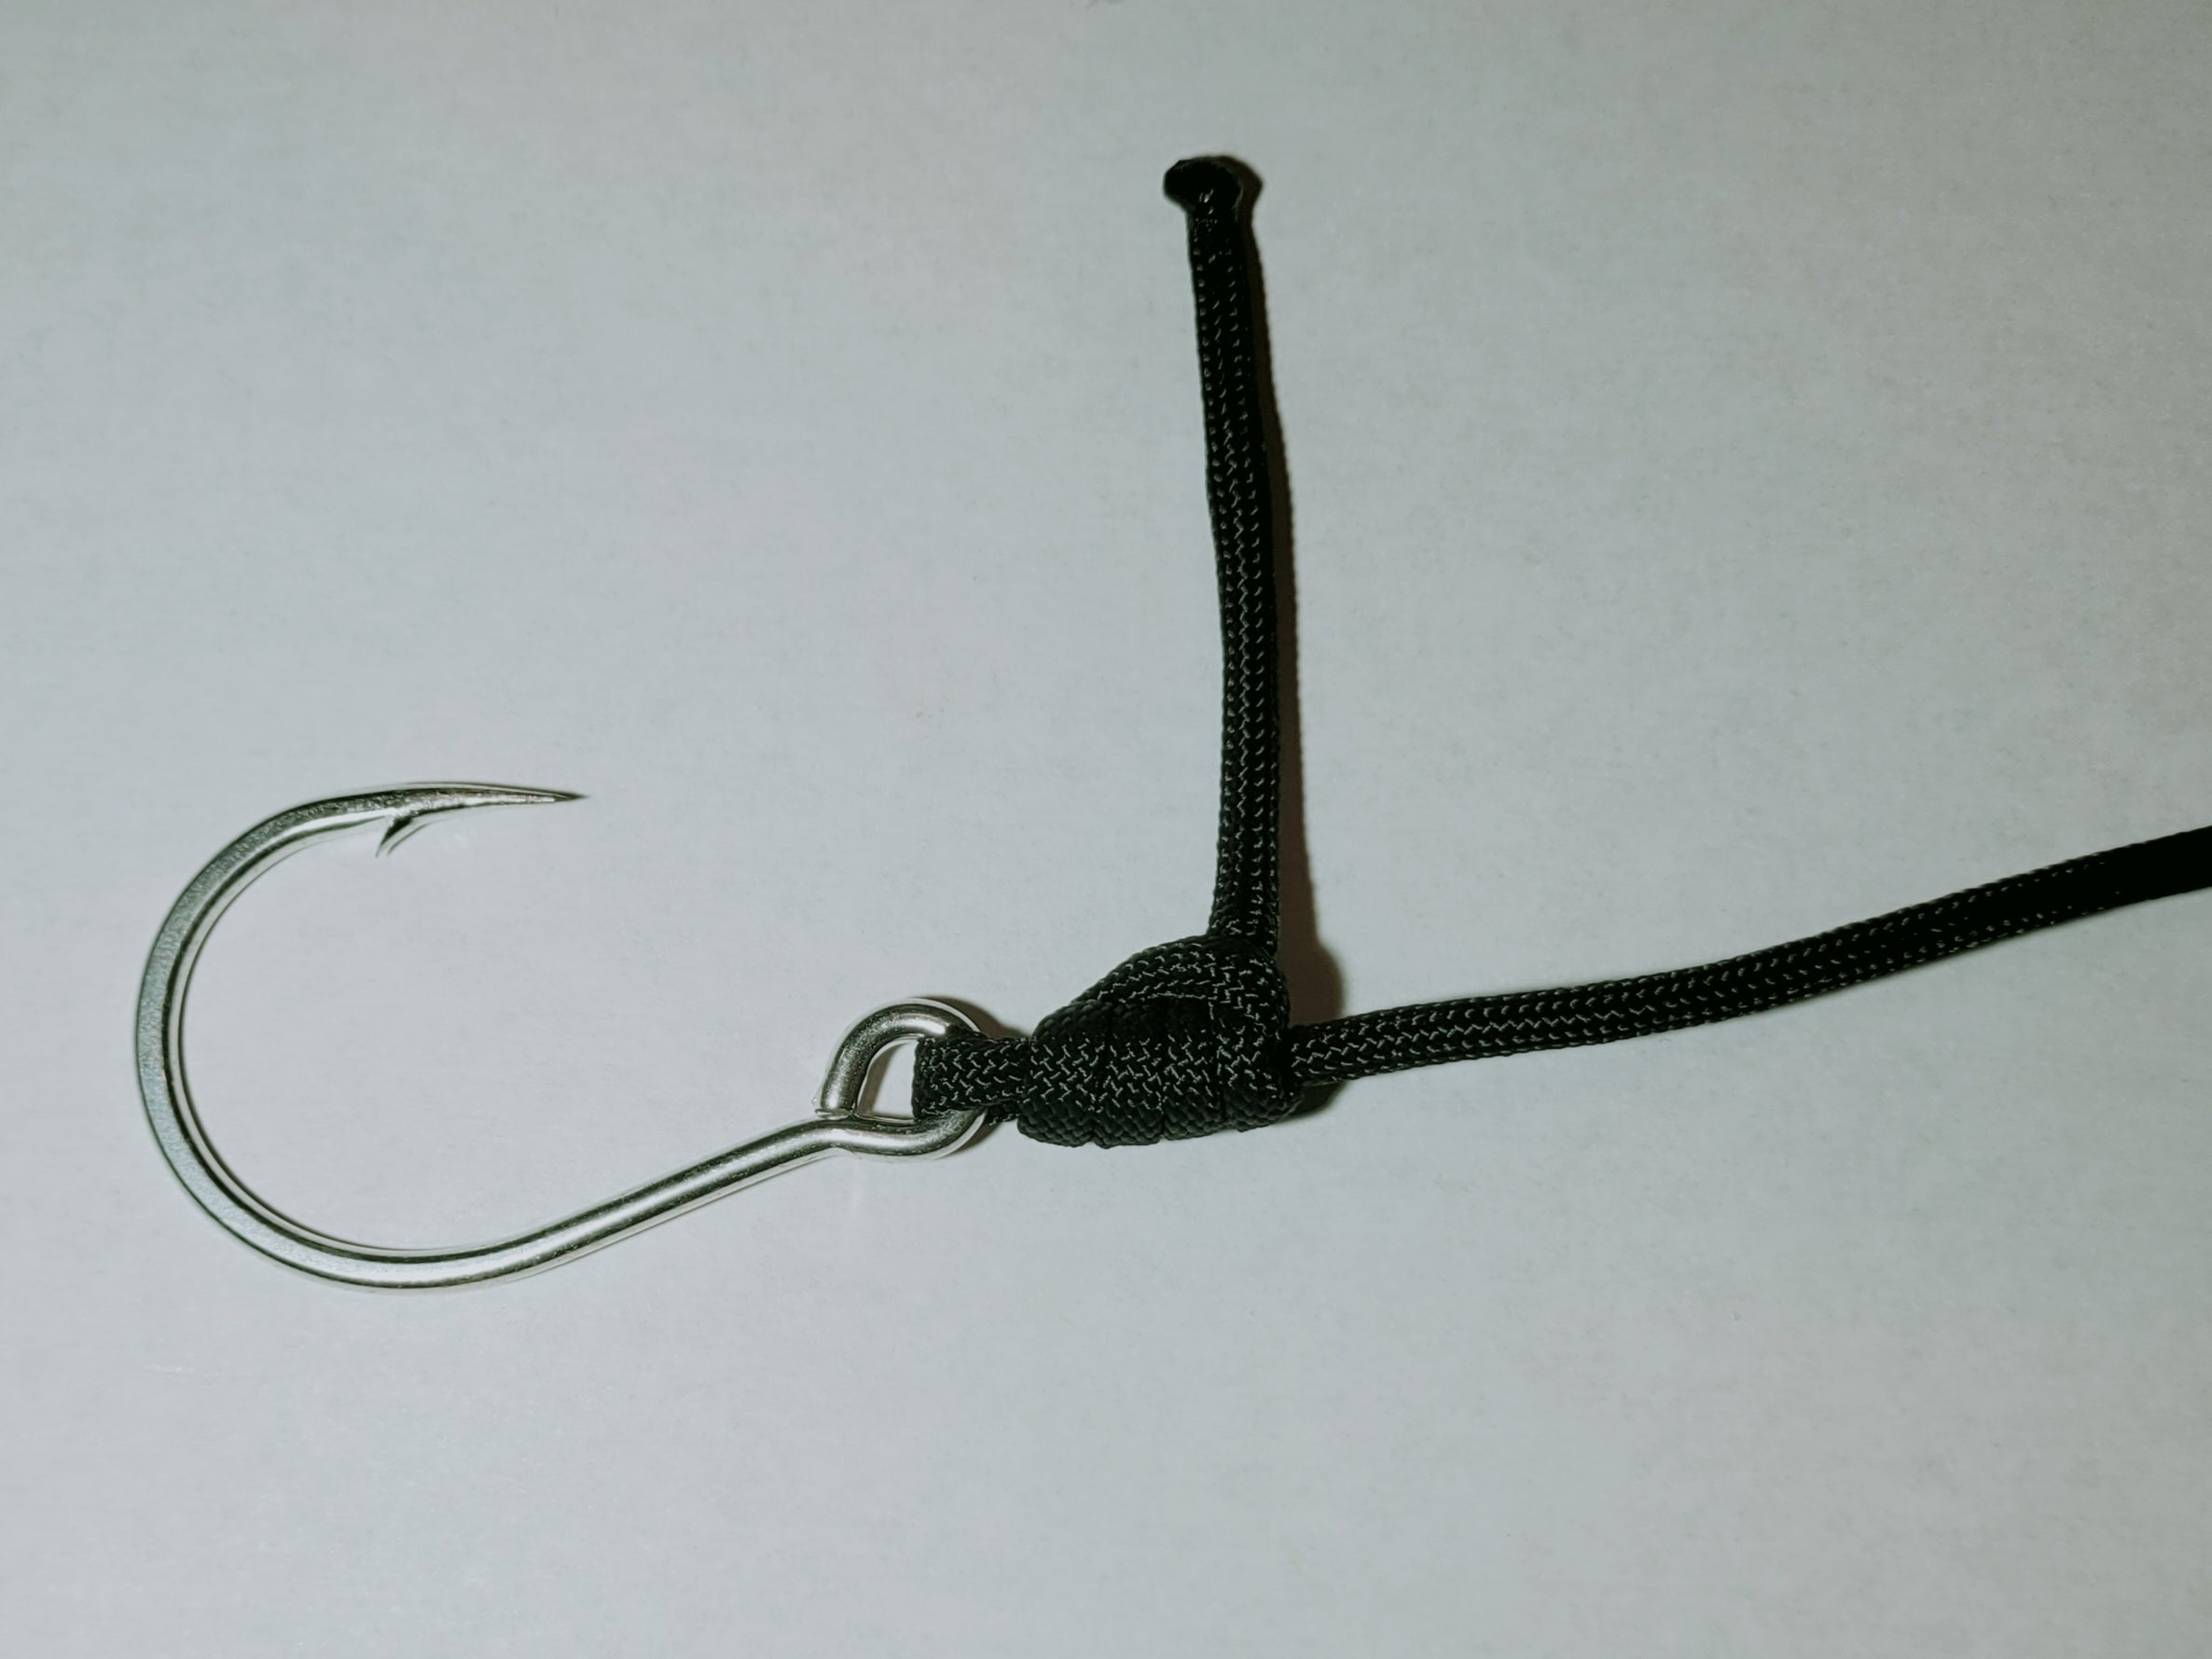 Are You Nuts? Know your Fishing Knots! - The Uni Knot